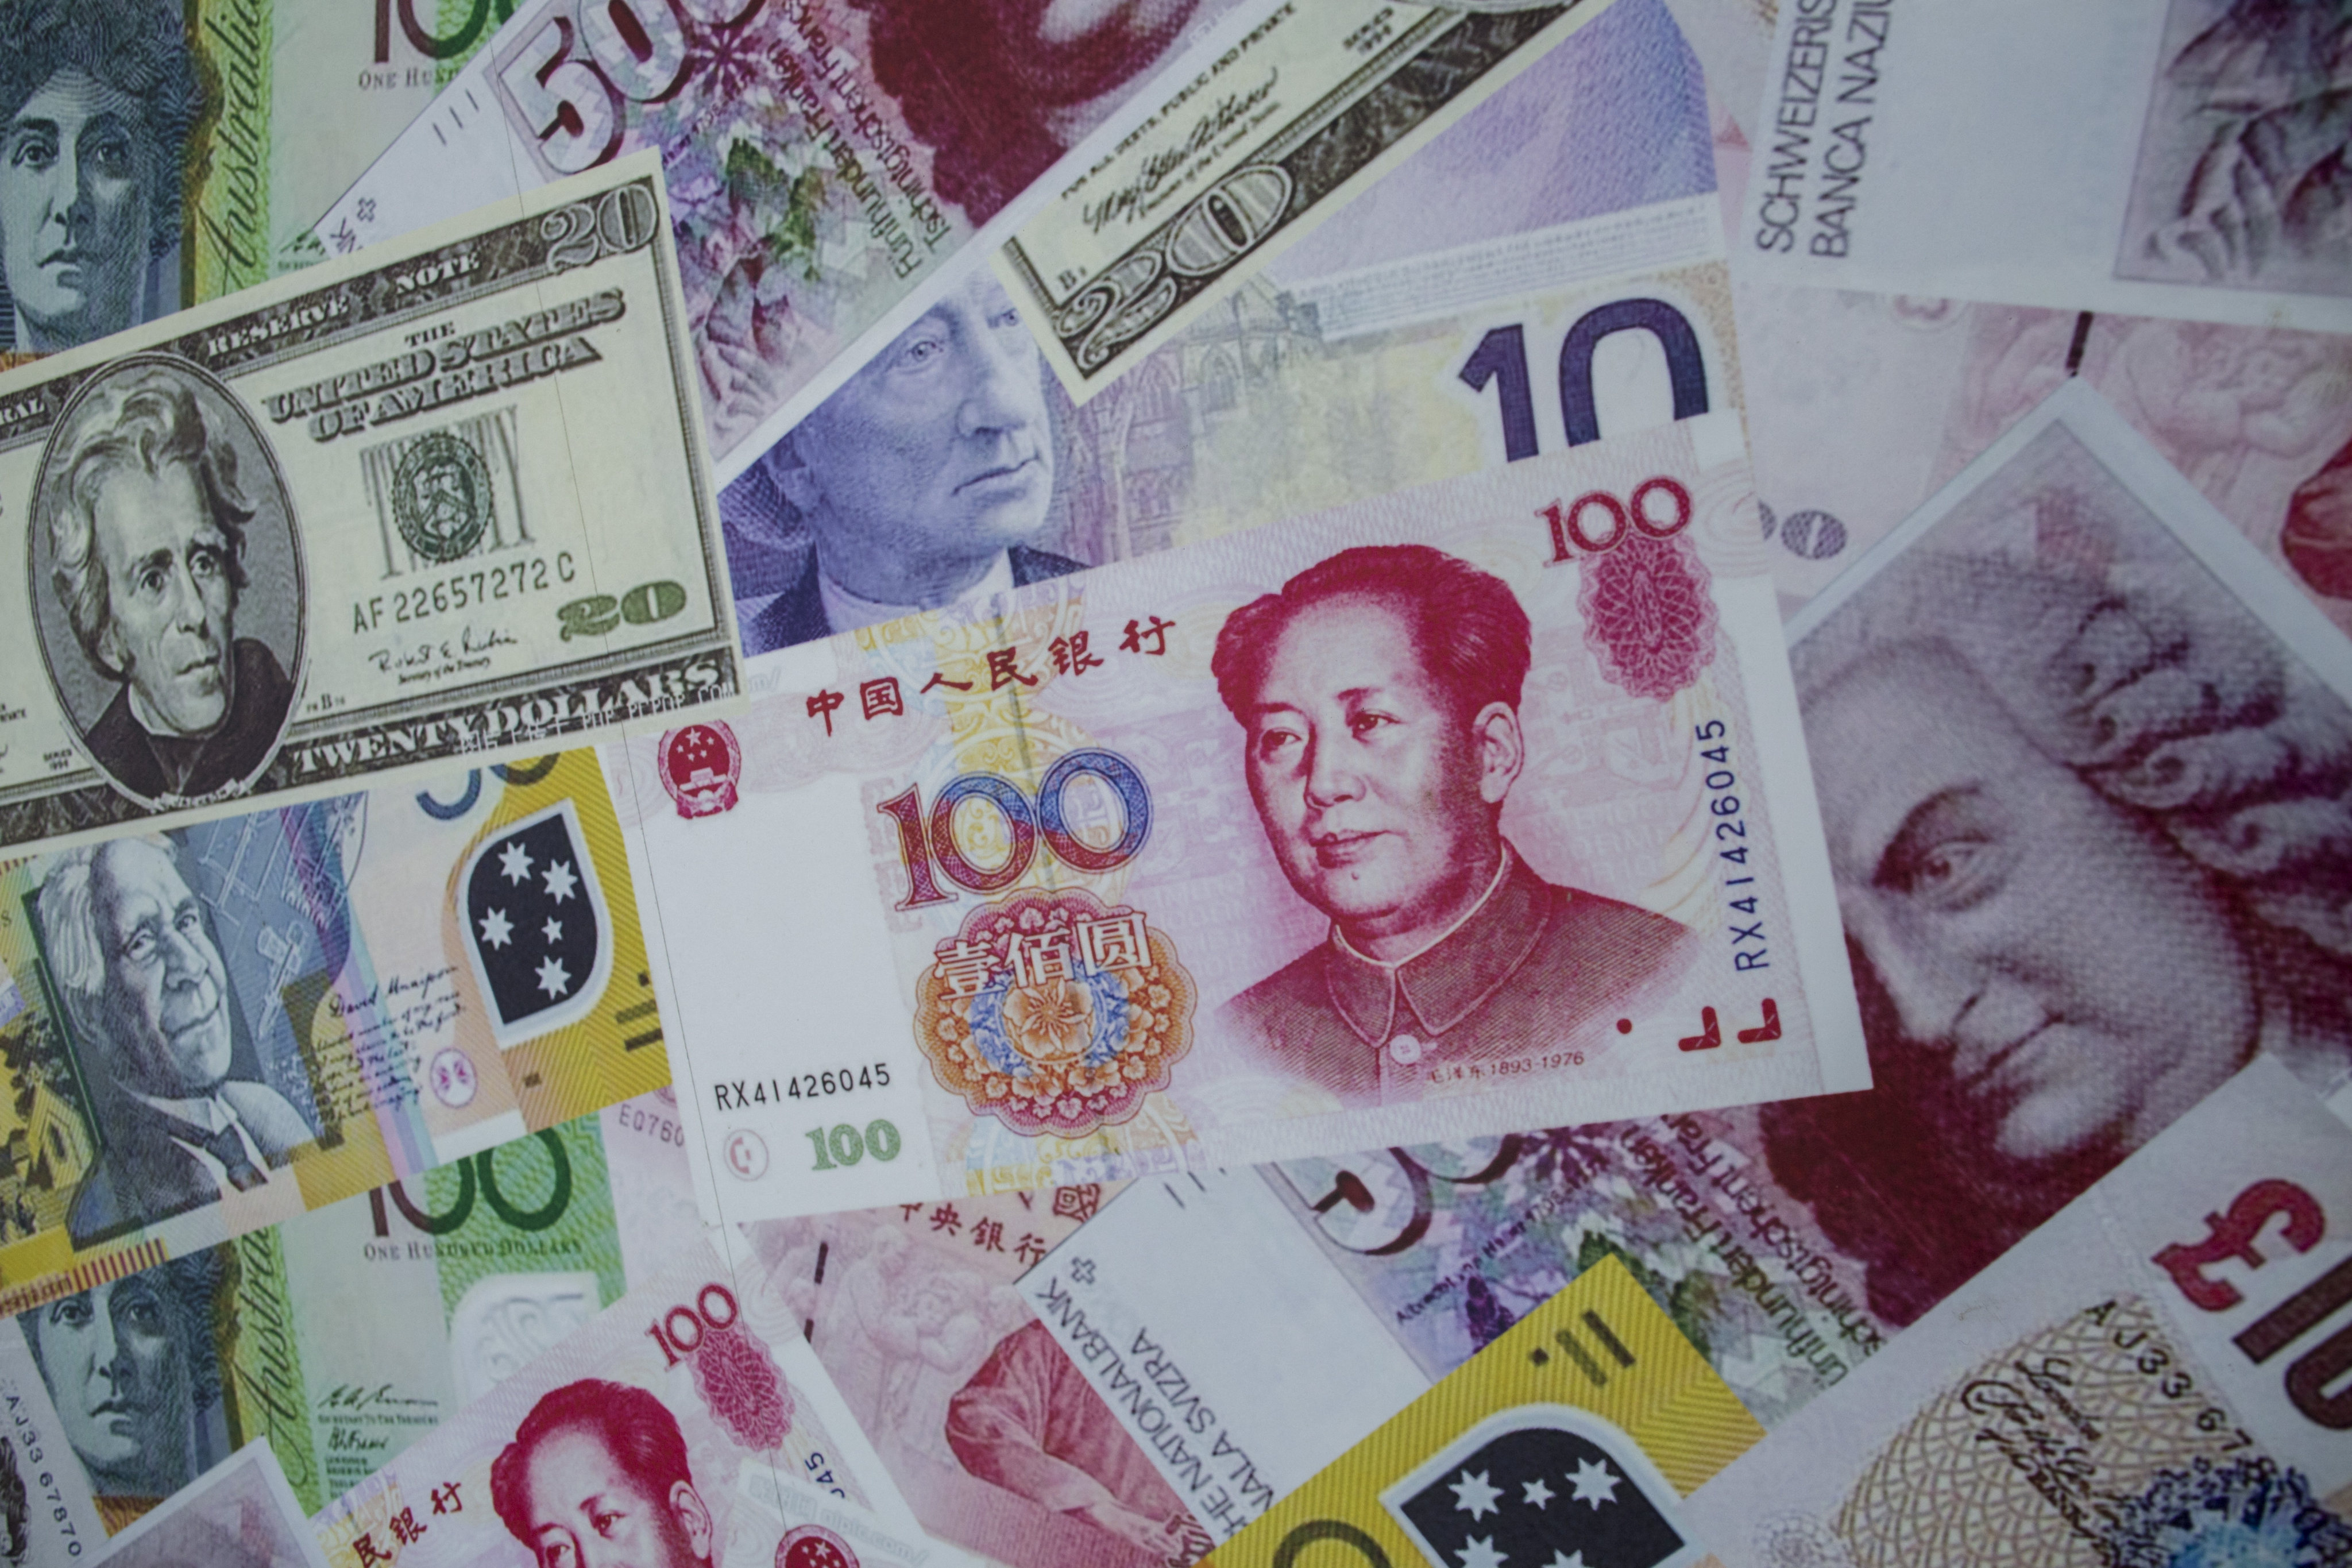 An advert showing various currencies, including the Chinese yuan and US dollar. Photo: Reuters